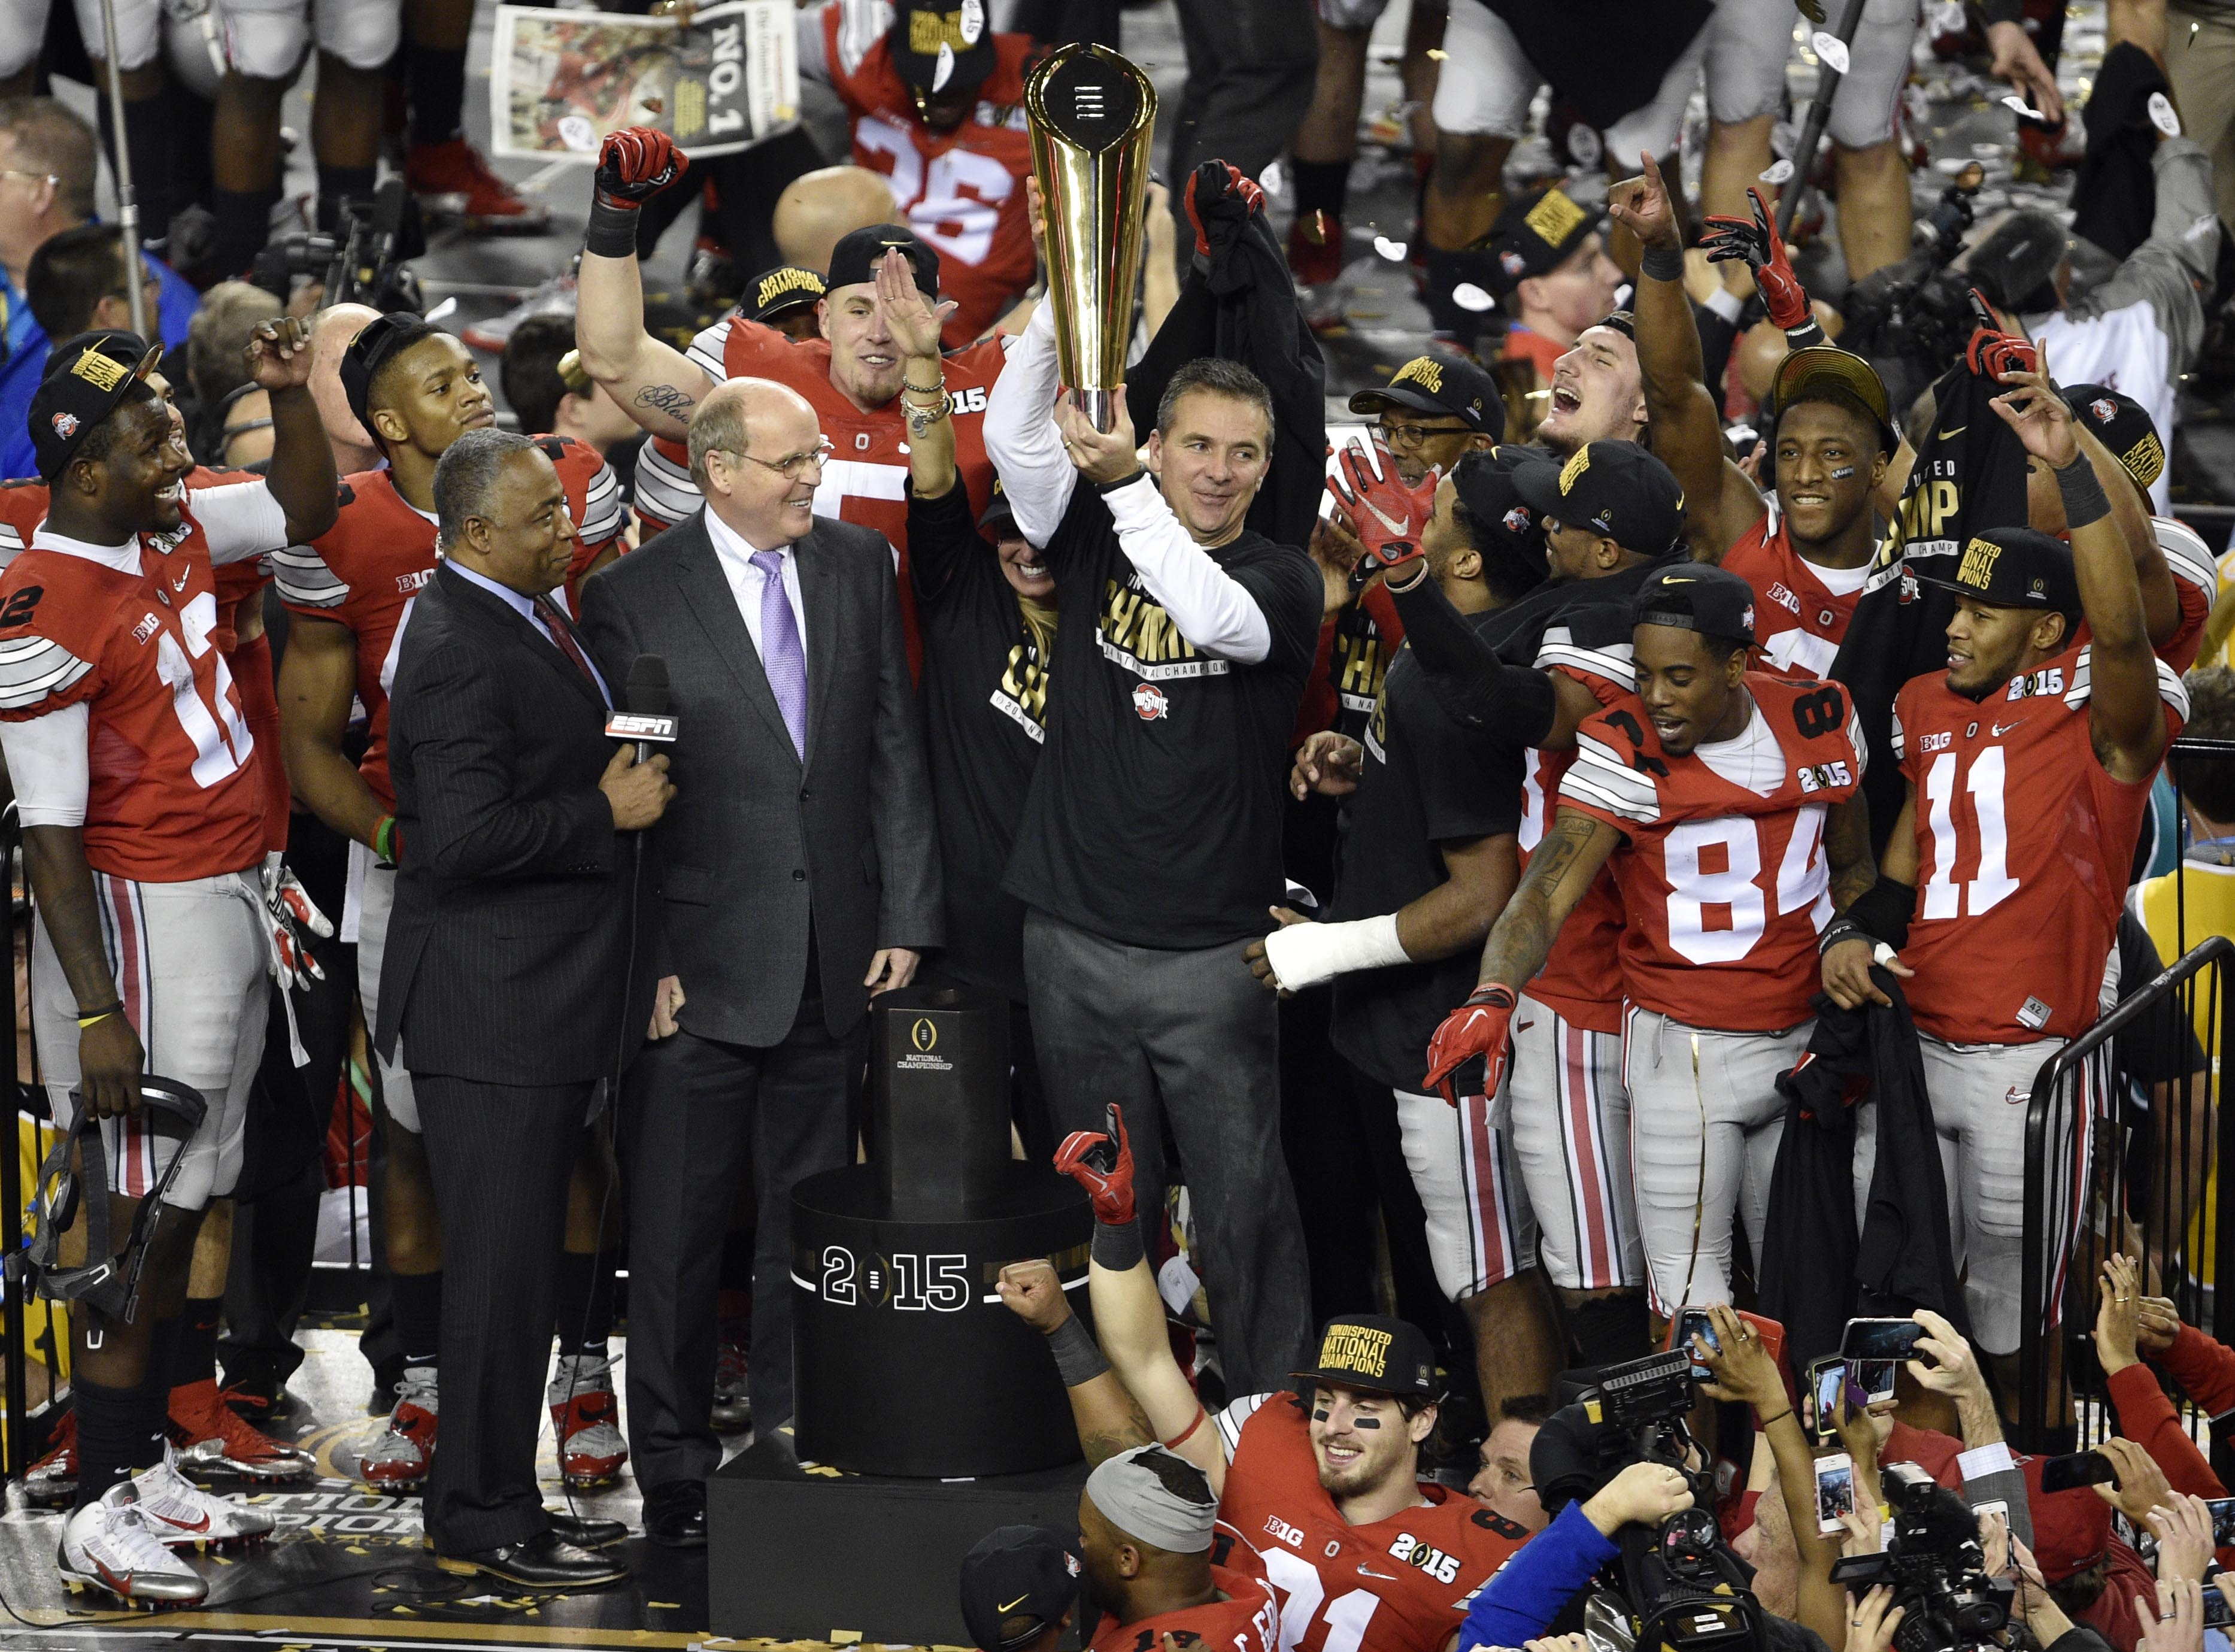 2014 Ohio State Football team: Where are they now? - Ten Network